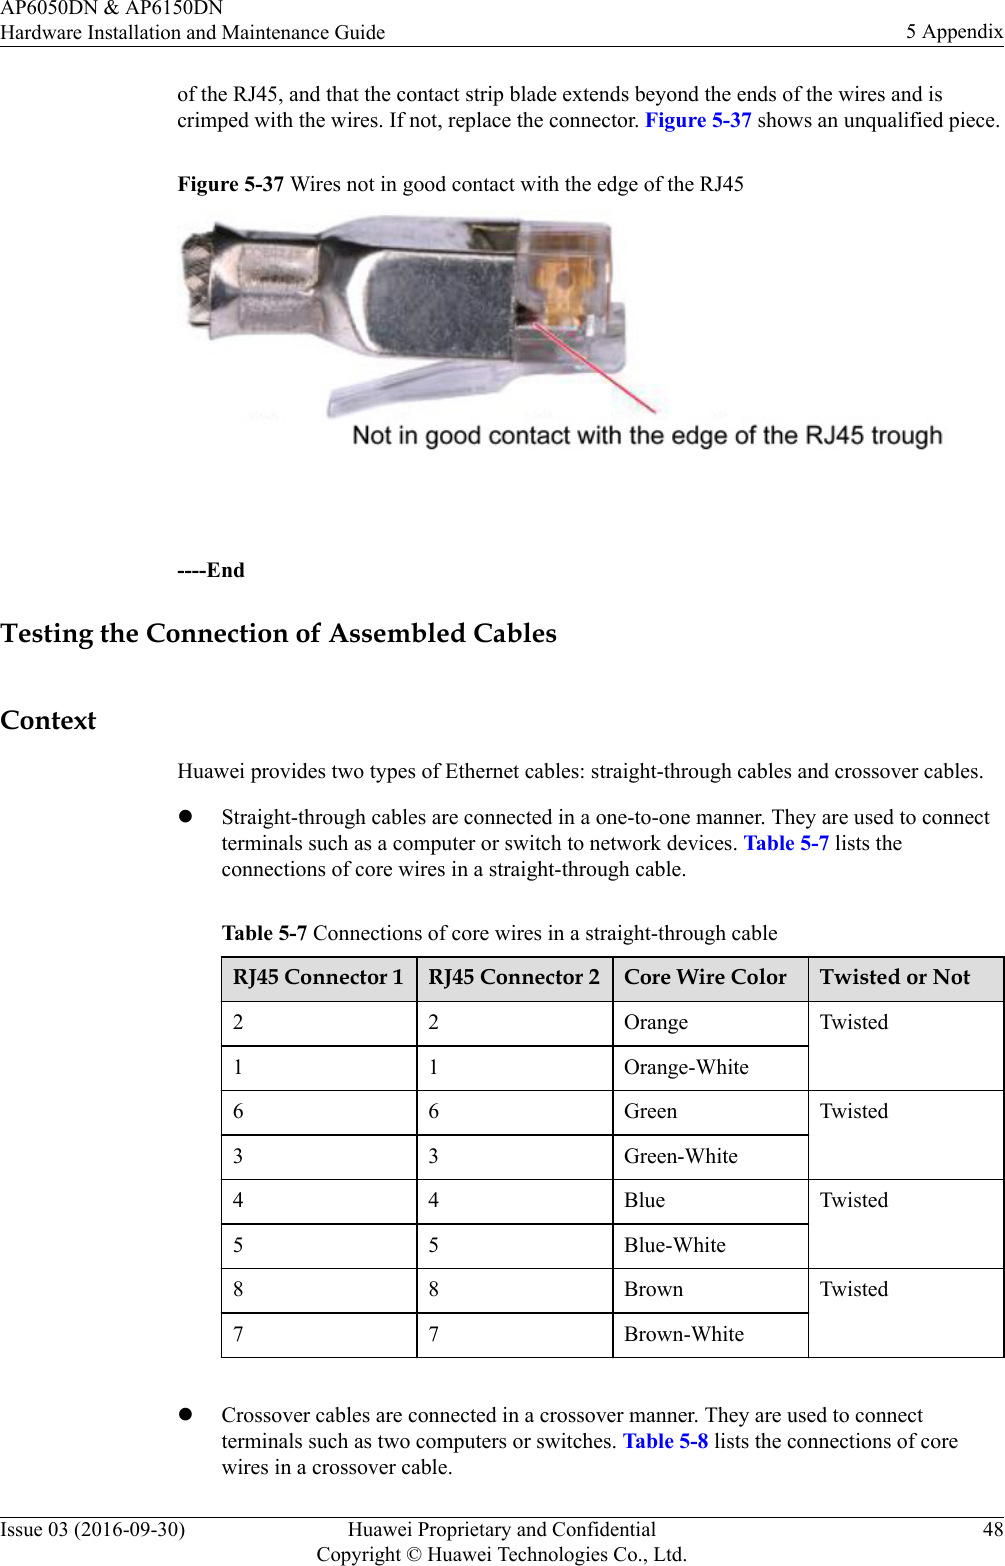 of the RJ45, and that the contact strip blade extends beyond the ends of the wires and iscrimped with the wires. If not, replace the connector. Figure 5-37 shows an unqualified piece.Figure 5-37 Wires not in good contact with the edge of the RJ45 ----EndTesting the Connection of Assembled CablesContextHuawei provides two types of Ethernet cables: straight-through cables and crossover cables.lStraight-through cables are connected in a one-to-one manner. They are used to connectterminals such as a computer or switch to network devices. Table 5-7 lists theconnections of core wires in a straight-through cable.Table 5-7 Connections of core wires in a straight-through cableRJ45 Connector 1 RJ45 Connector 2 Core Wire Color Twisted or Not2 2 Orange Twisted1 1 Orange-White6 6 Green Twisted3 3 Green-White4 4 Blue Twisted5 5 Blue-White8 8 Brown Twisted7 7 Brown-White lCrossover cables are connected in a crossover manner. They are used to connectterminals such as two computers or switches. Table 5-8 lists the connections of corewires in a crossover cable.AP6050DN &amp; AP6150DNHardware Installation and Maintenance Guide 5 AppendixIssue 03 (2016-09-30) Huawei Proprietary and ConfidentialCopyright © Huawei Technologies Co., Ltd.48